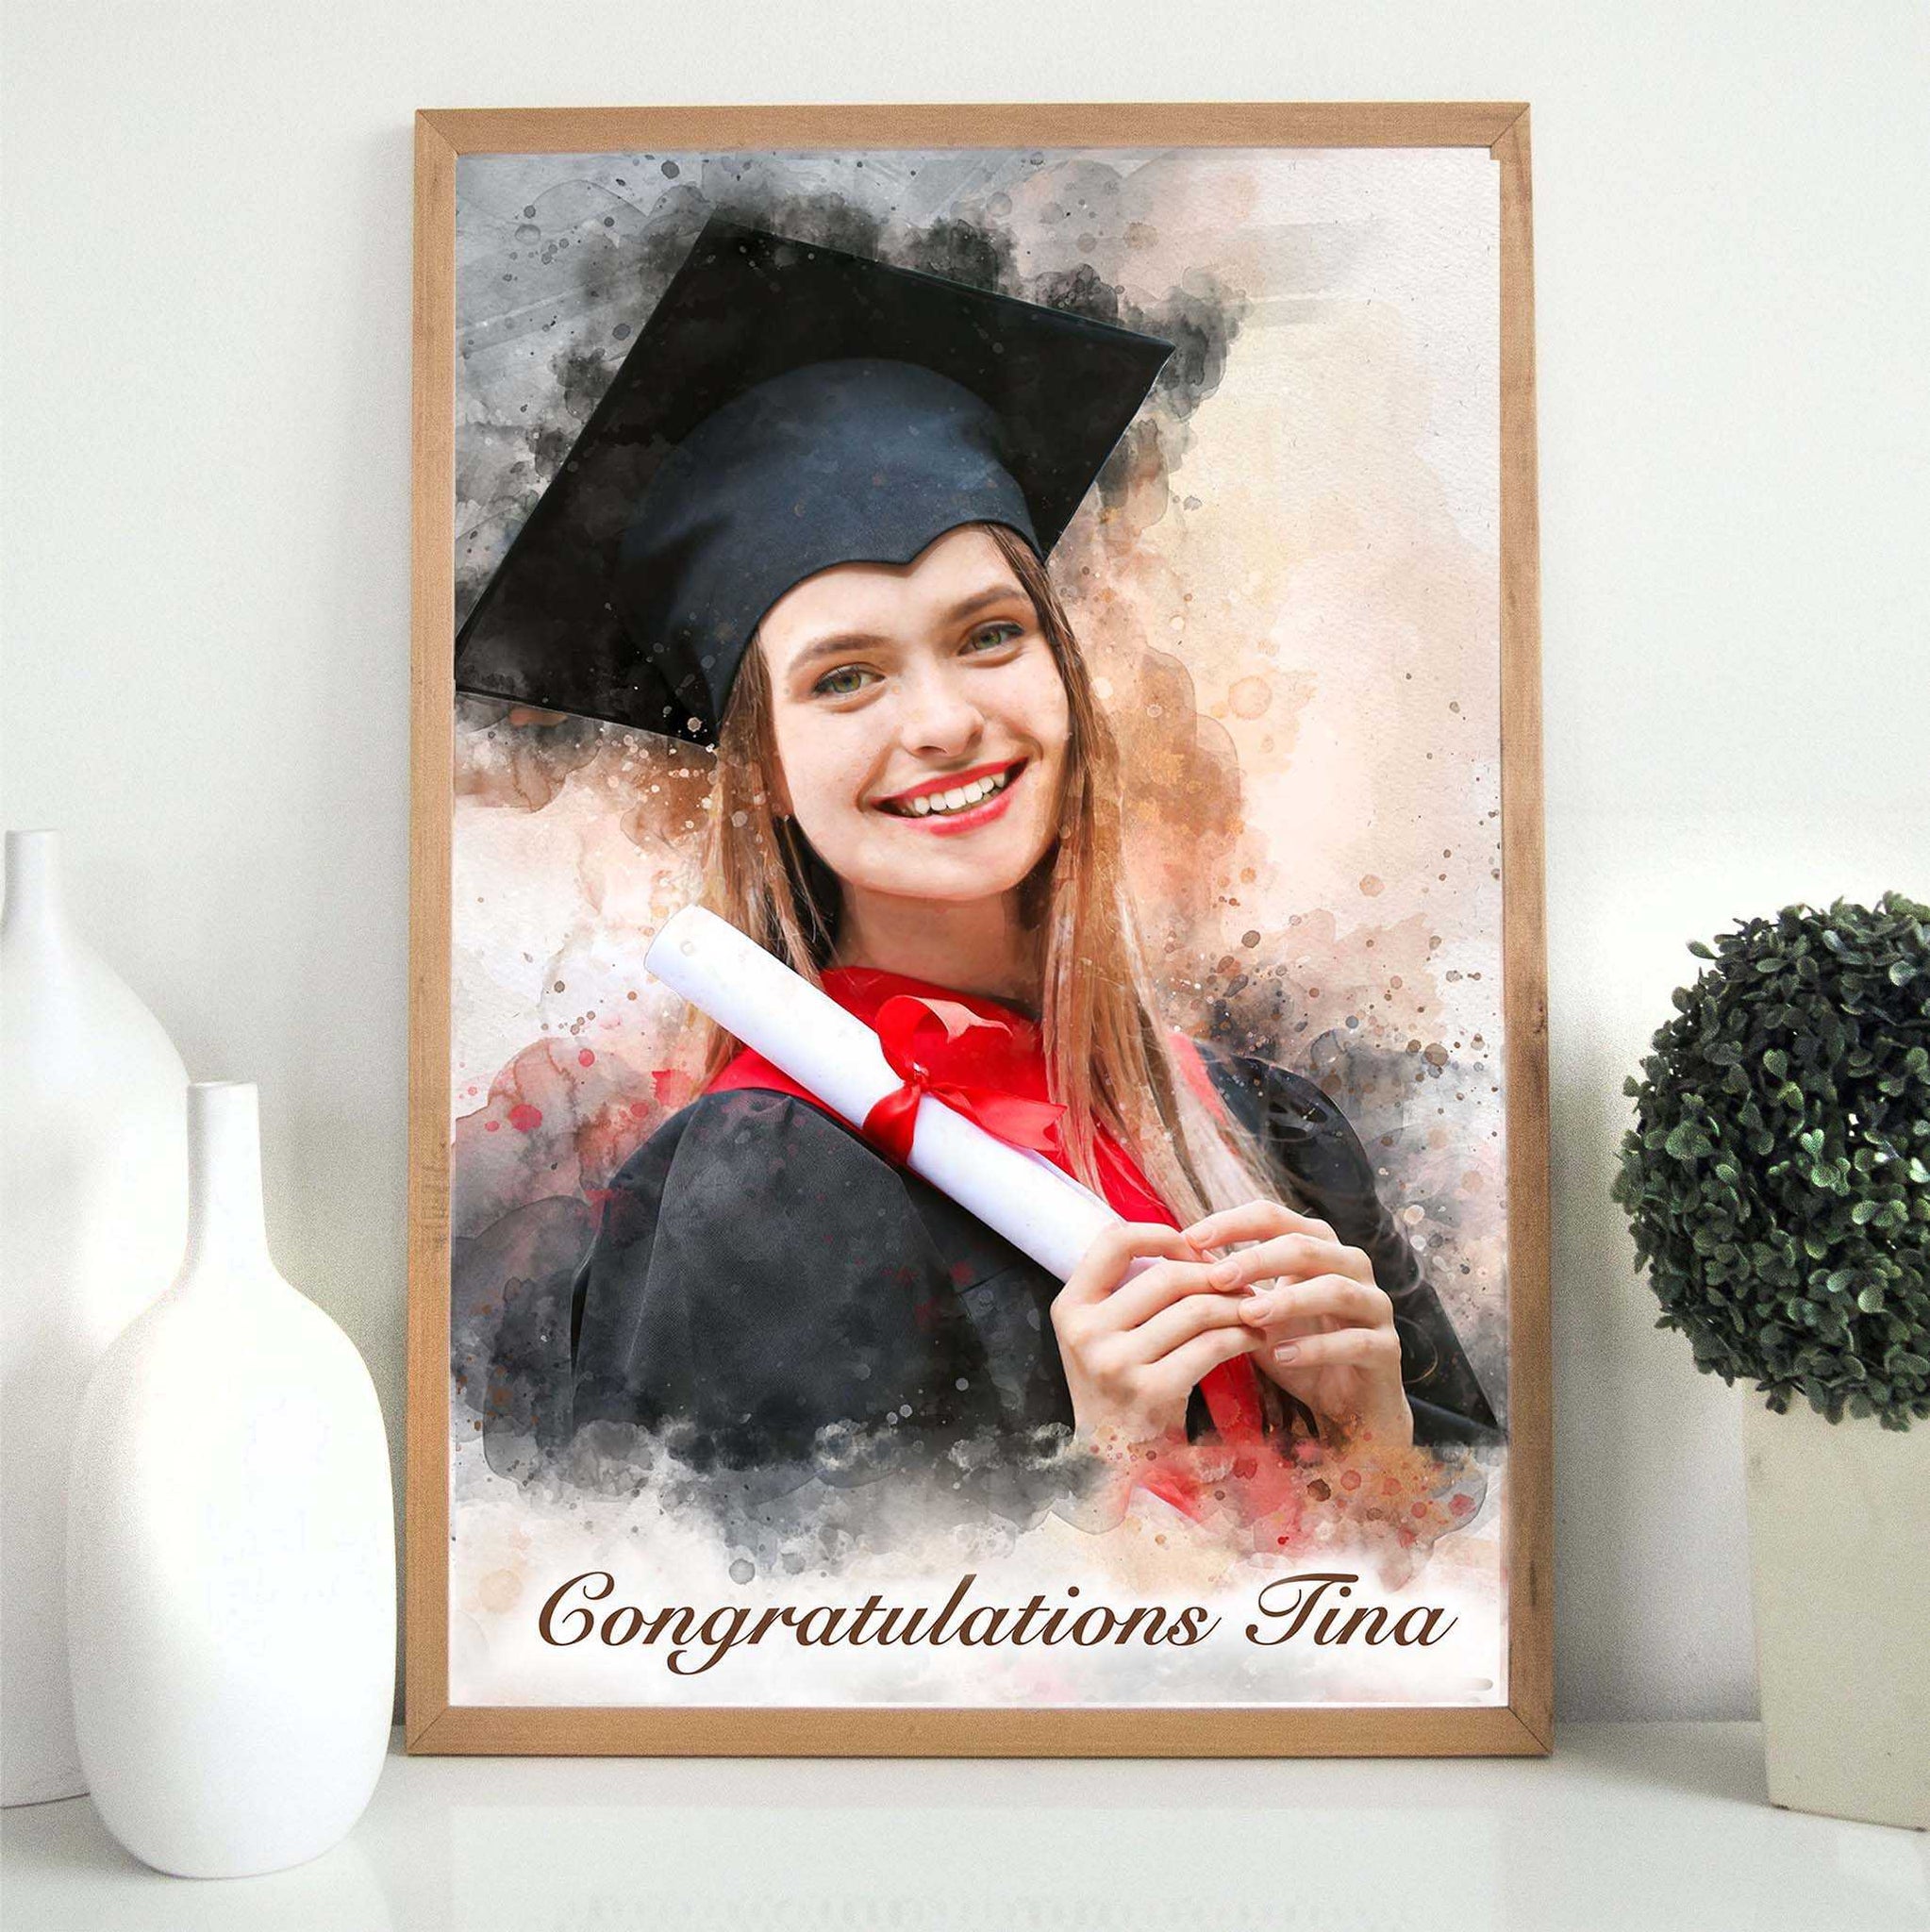 Personalized Graduation Gifts for Her 🎁 University Graduation Gifts for Her | College Graduation Gifts from Parents - FromPicToArt